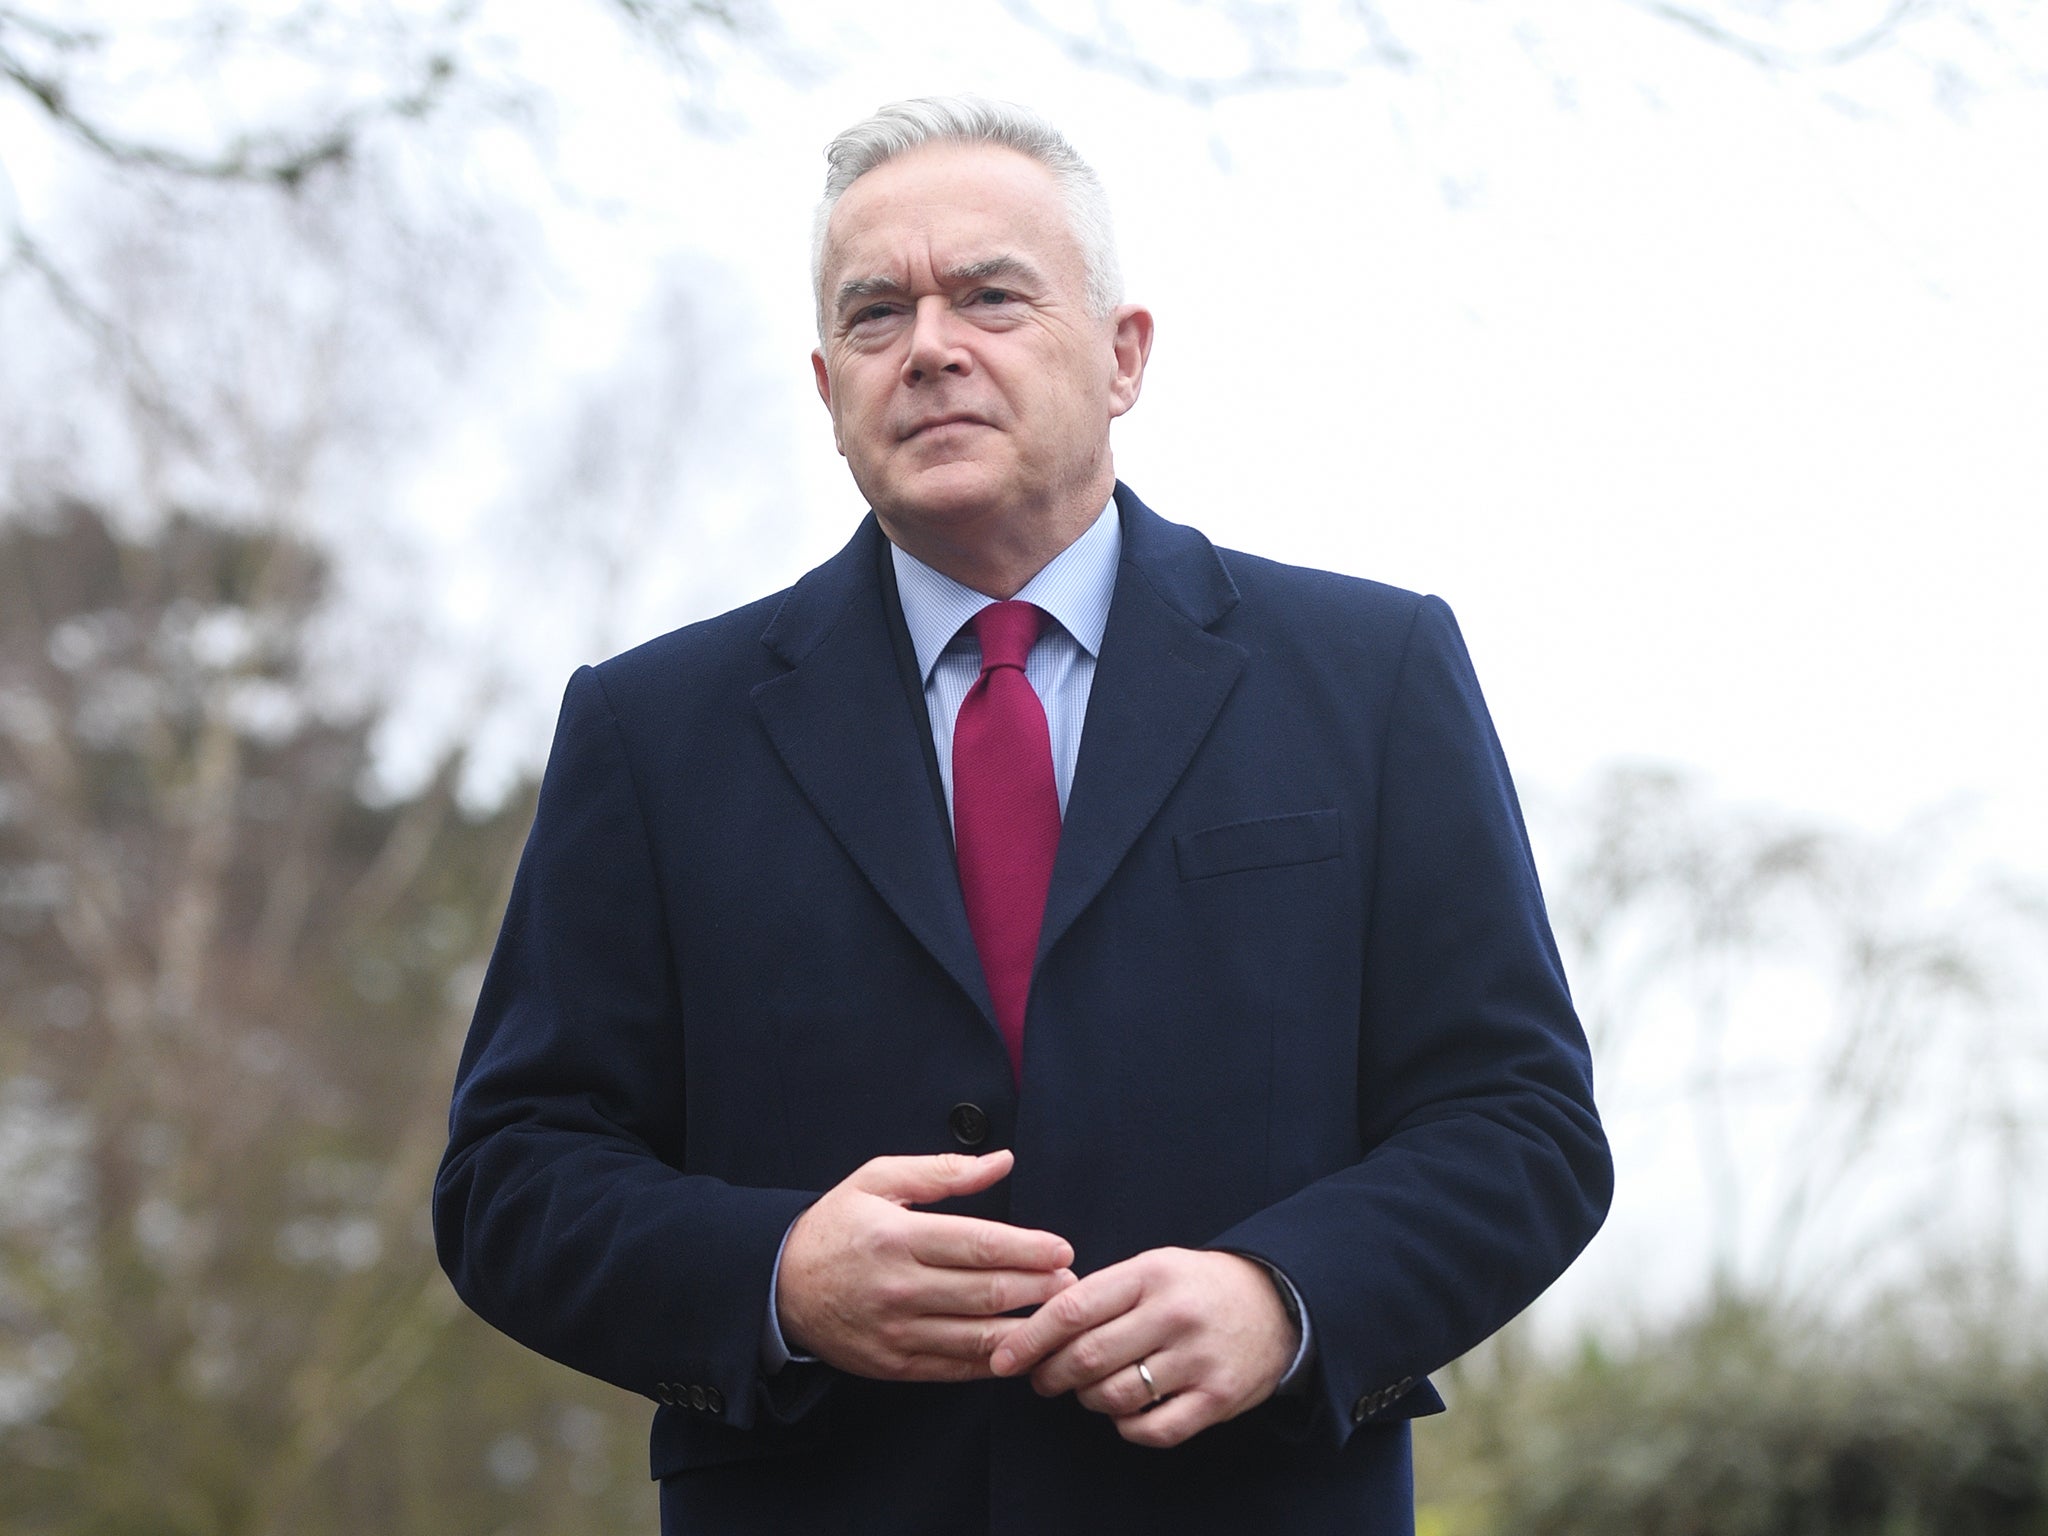 Huw Edwards had been at the forefront of BBC news coverage for decades